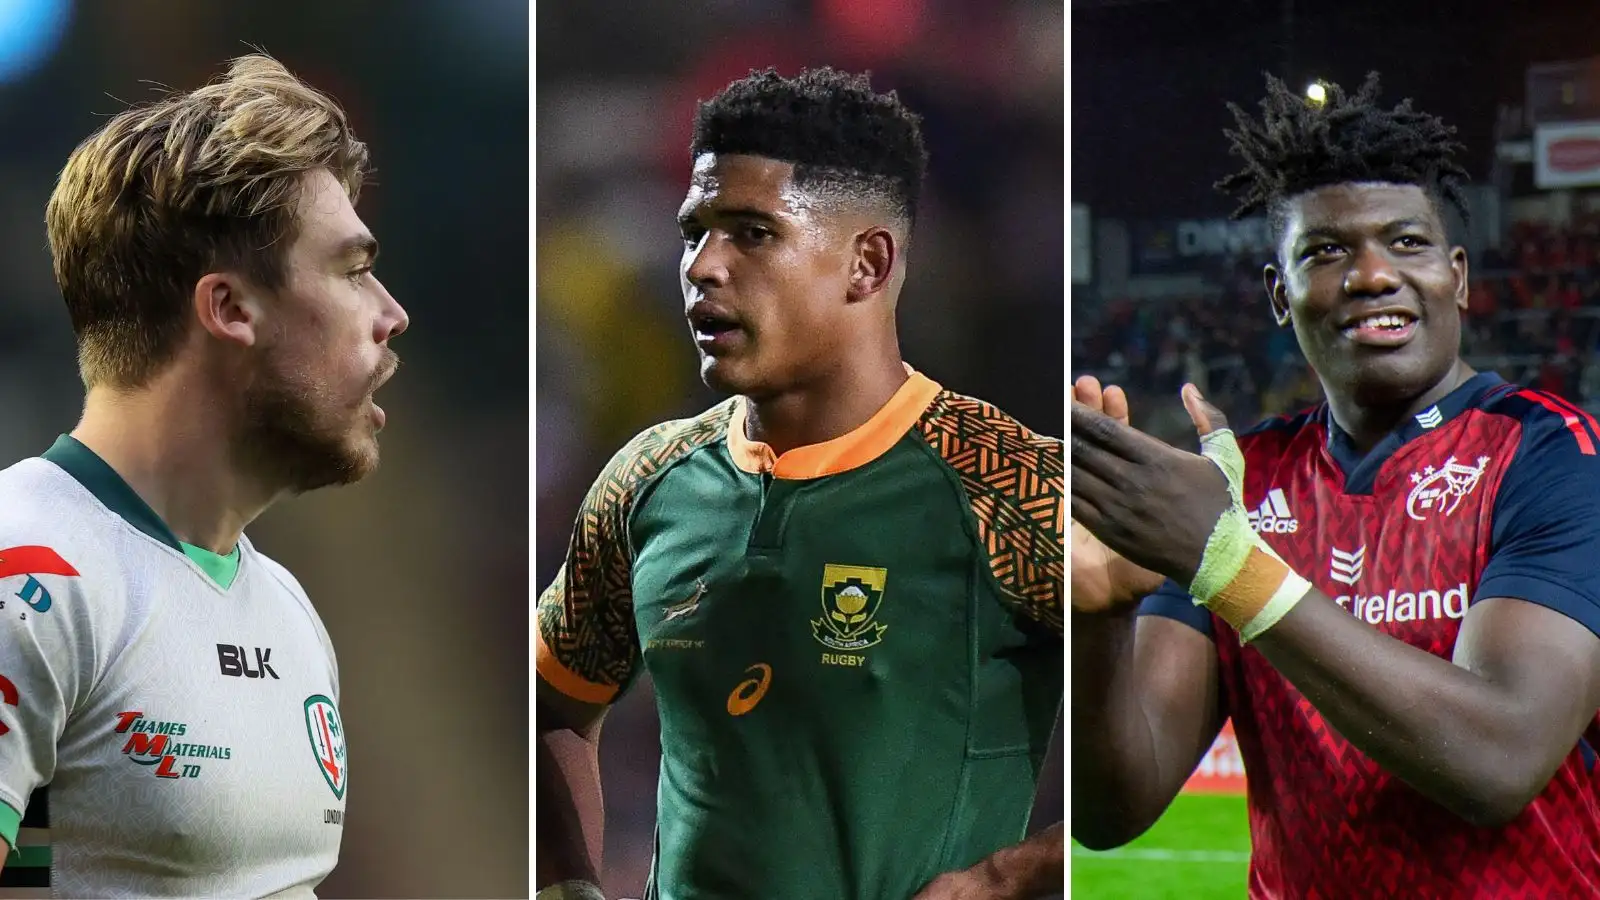 The new year will provide new opportunities, and with 2023 being a Rugby World Cup year, there is still a good chance that we will see some fresh faces in the Test arena. Ahead of 2023, we have picked out 13 rising stars that could force their way into international reckoning and earn their maiden Test caps.